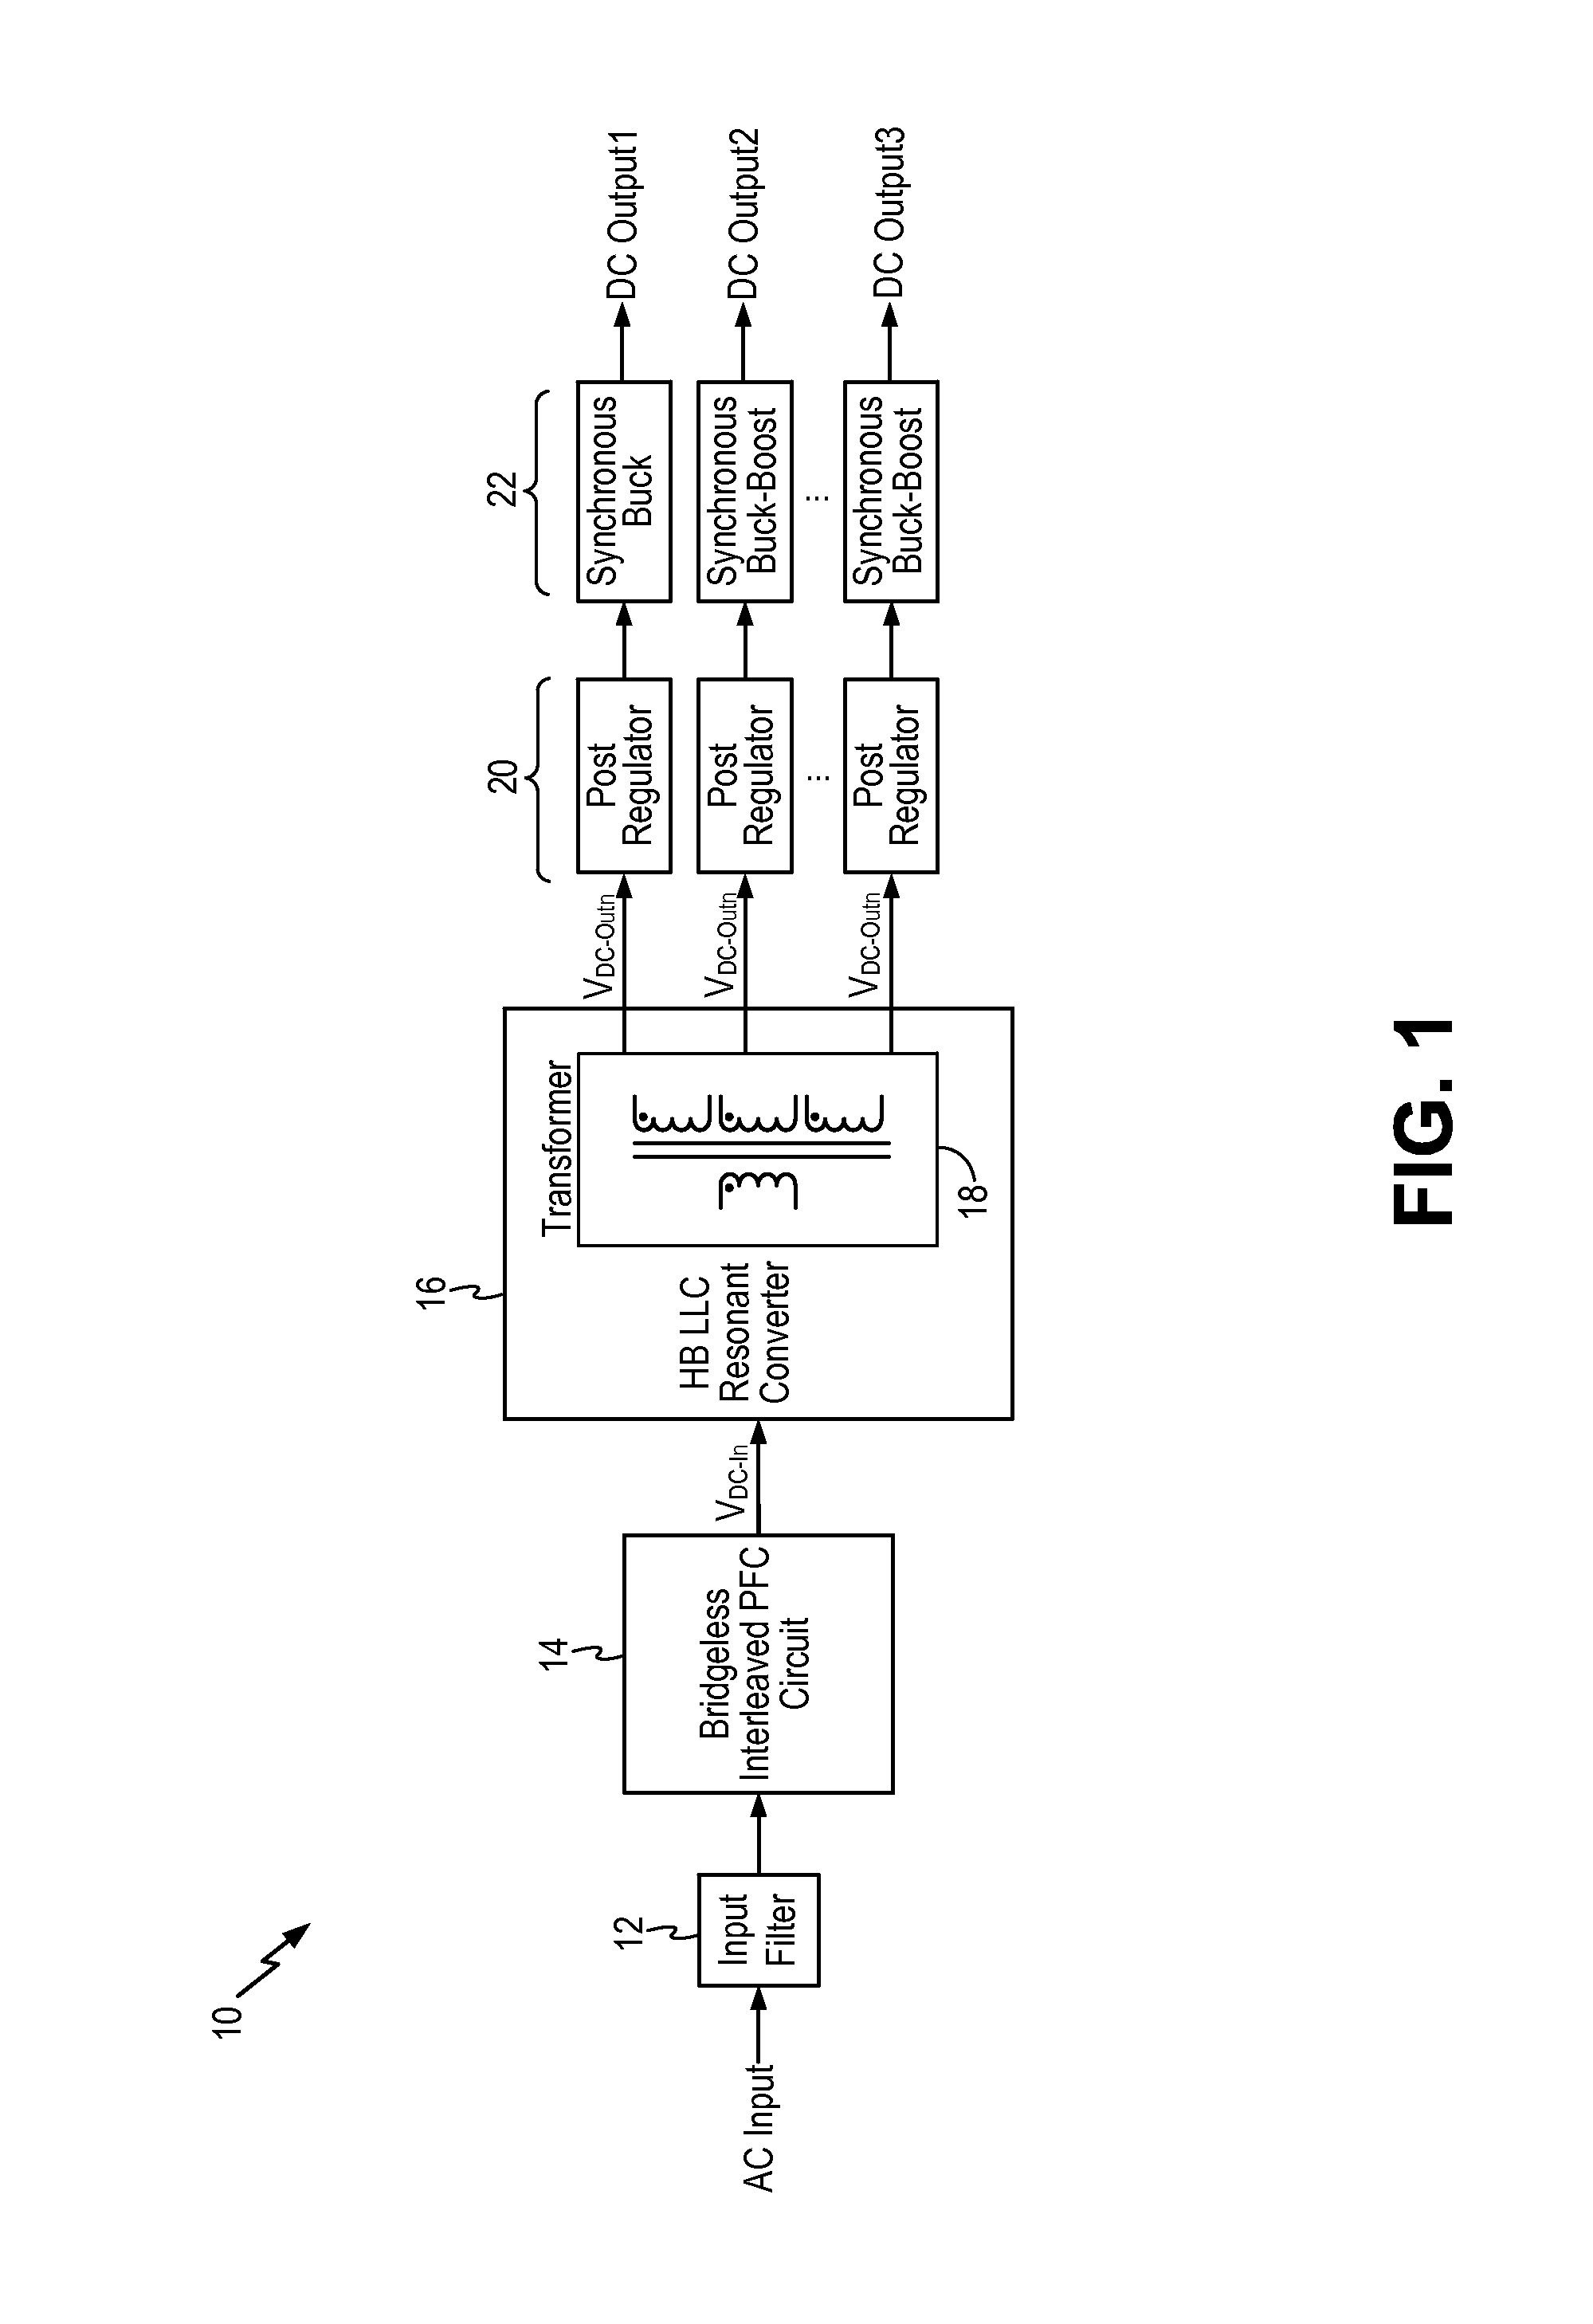 LLC resonant converter with lossless primary-side current feedback